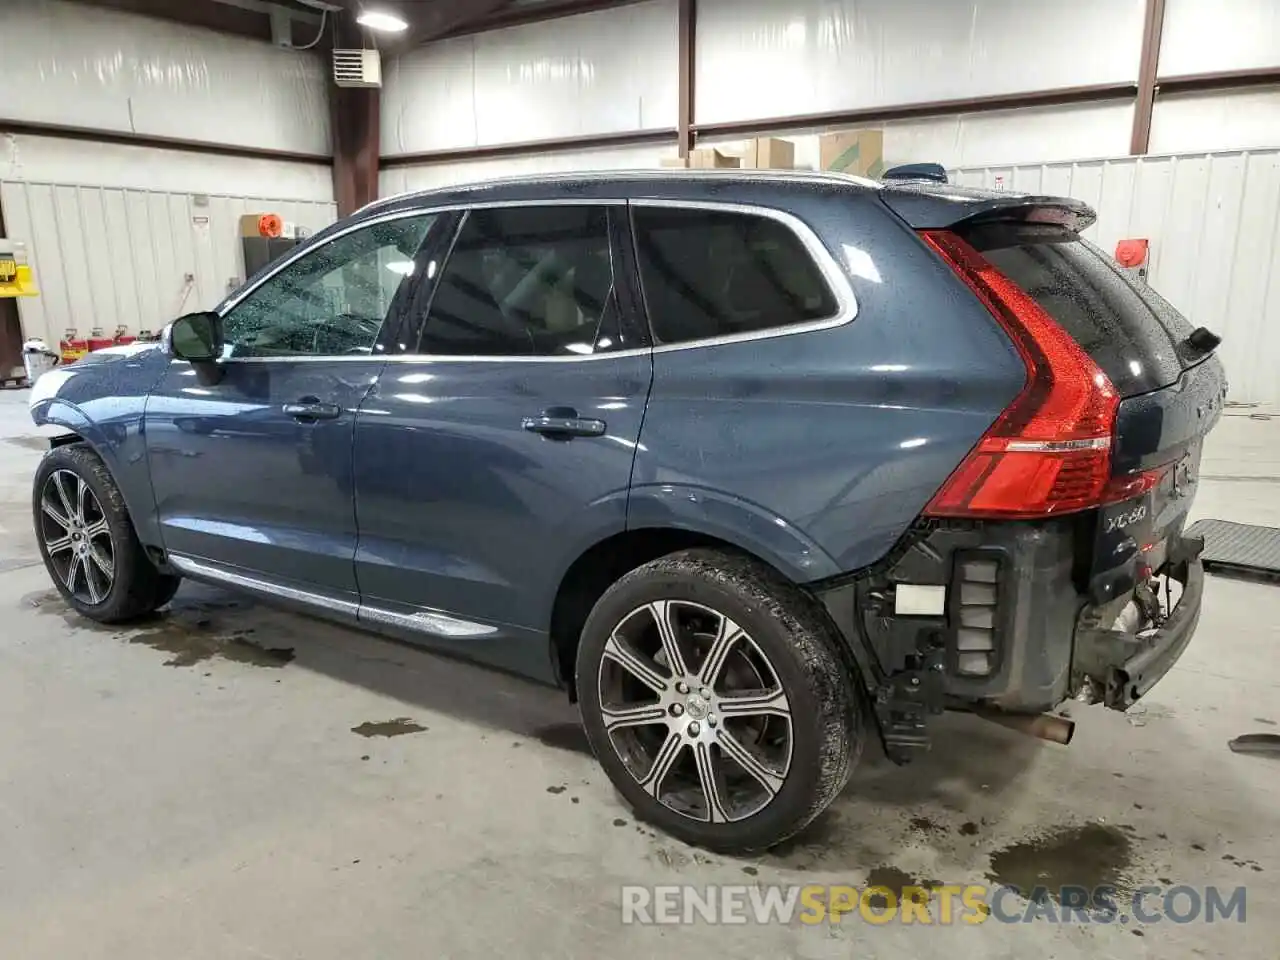 2 Photograph of a damaged car LYV102DLXKB242014 VOLVO XC60 2019